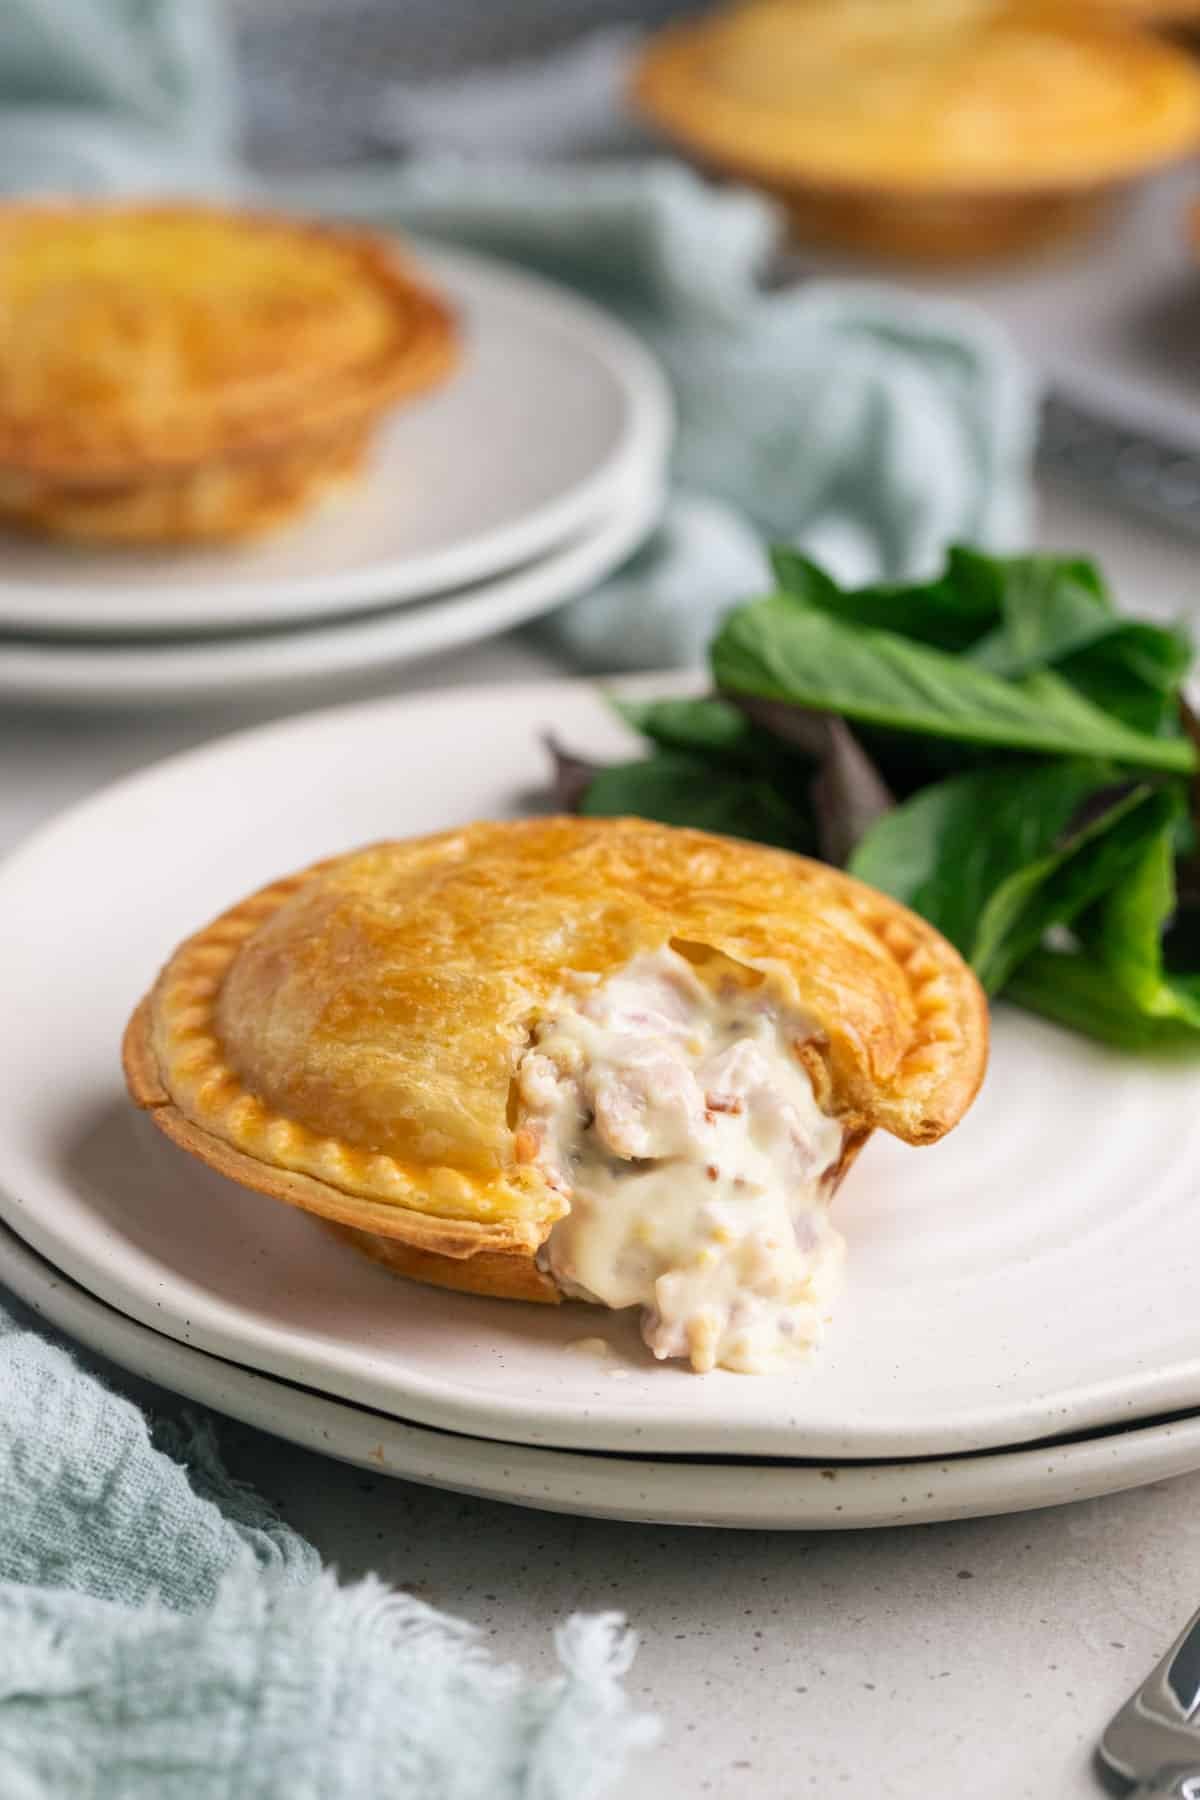 a pie on a plate with salad. The pie is cut open showing a creamy chicken filling.